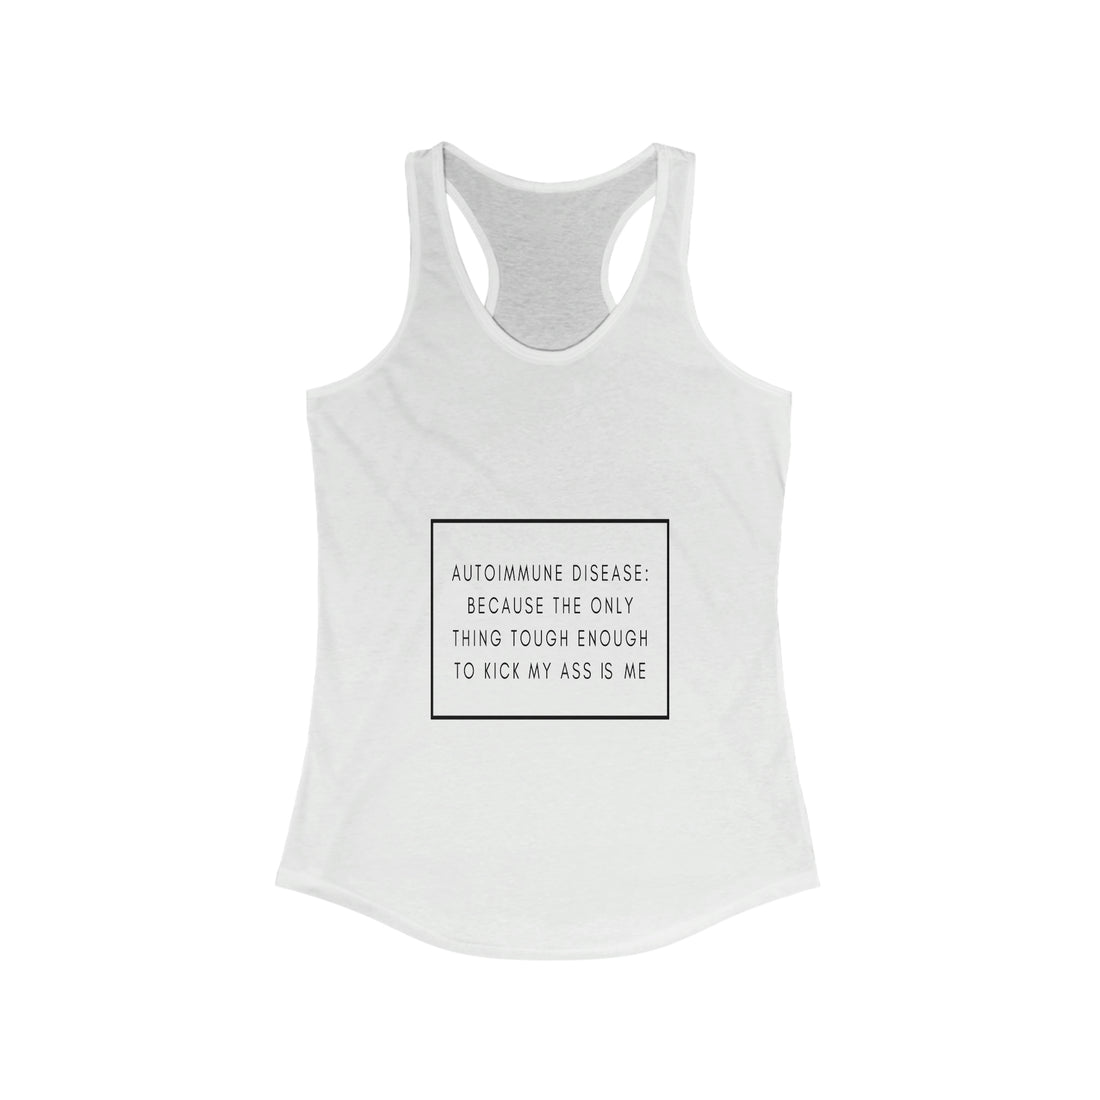 Autoimmune Disease Because The Only Thing Tough Enough To Kick My Ass Is Me - Racerback Tank Top